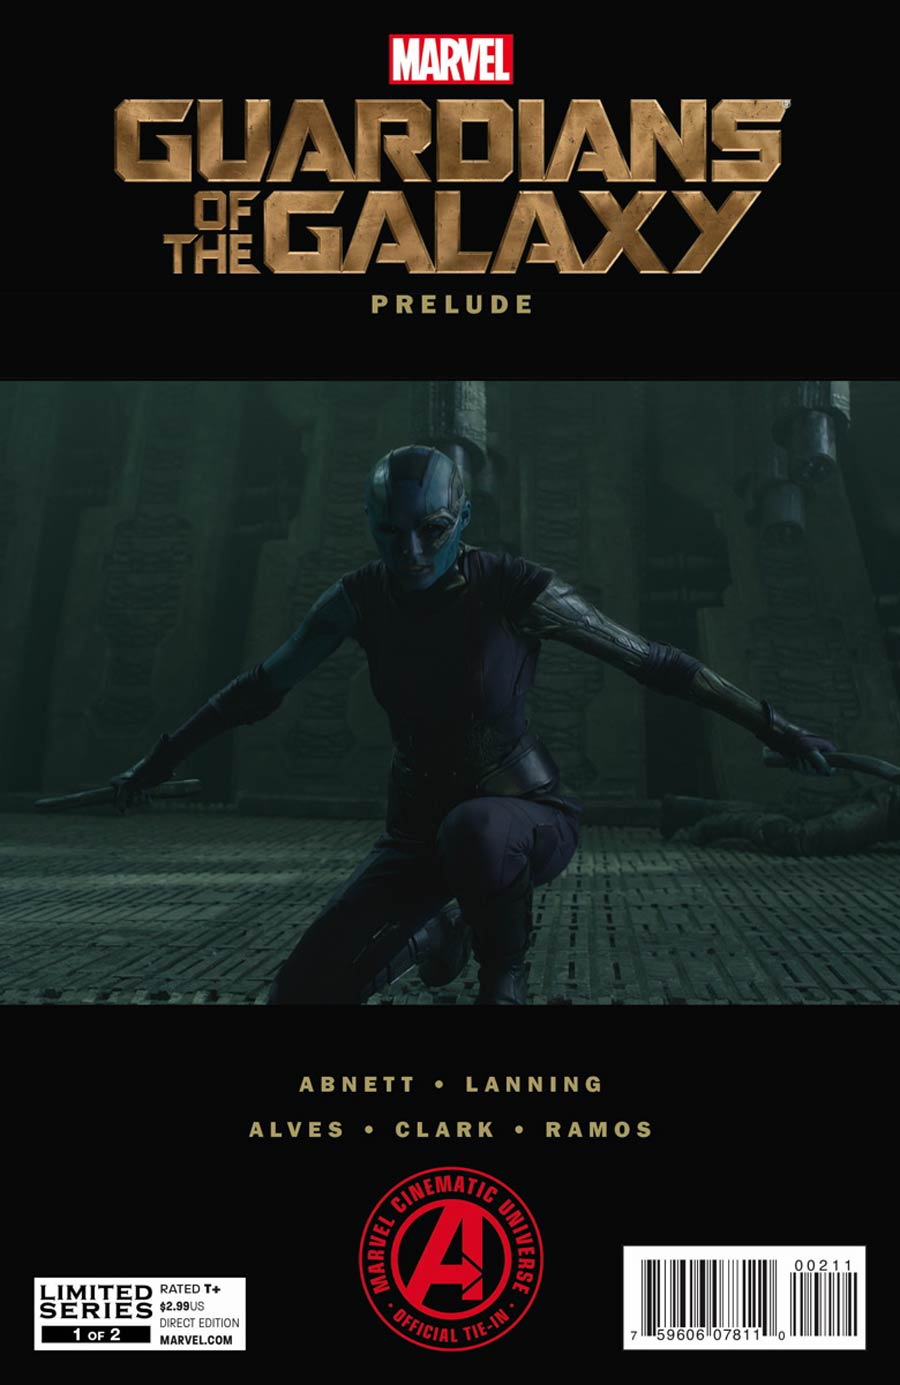 Marvels Guardians Of The Galaxy Prelude #1